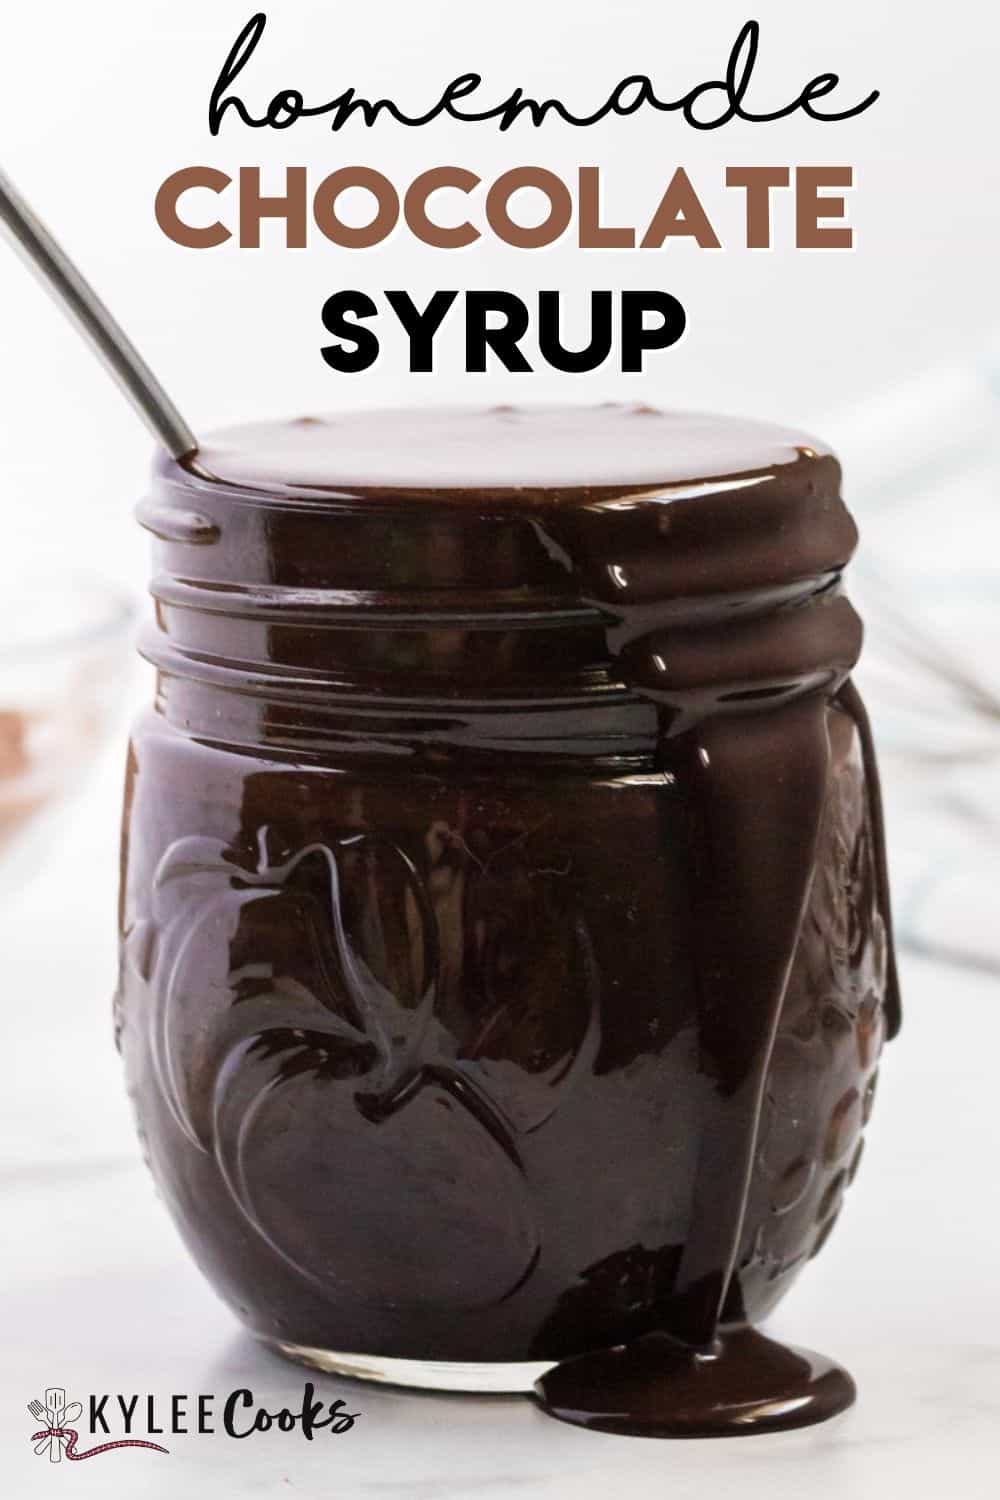 chocolate syrup in a jar with recipe title in text overlaid